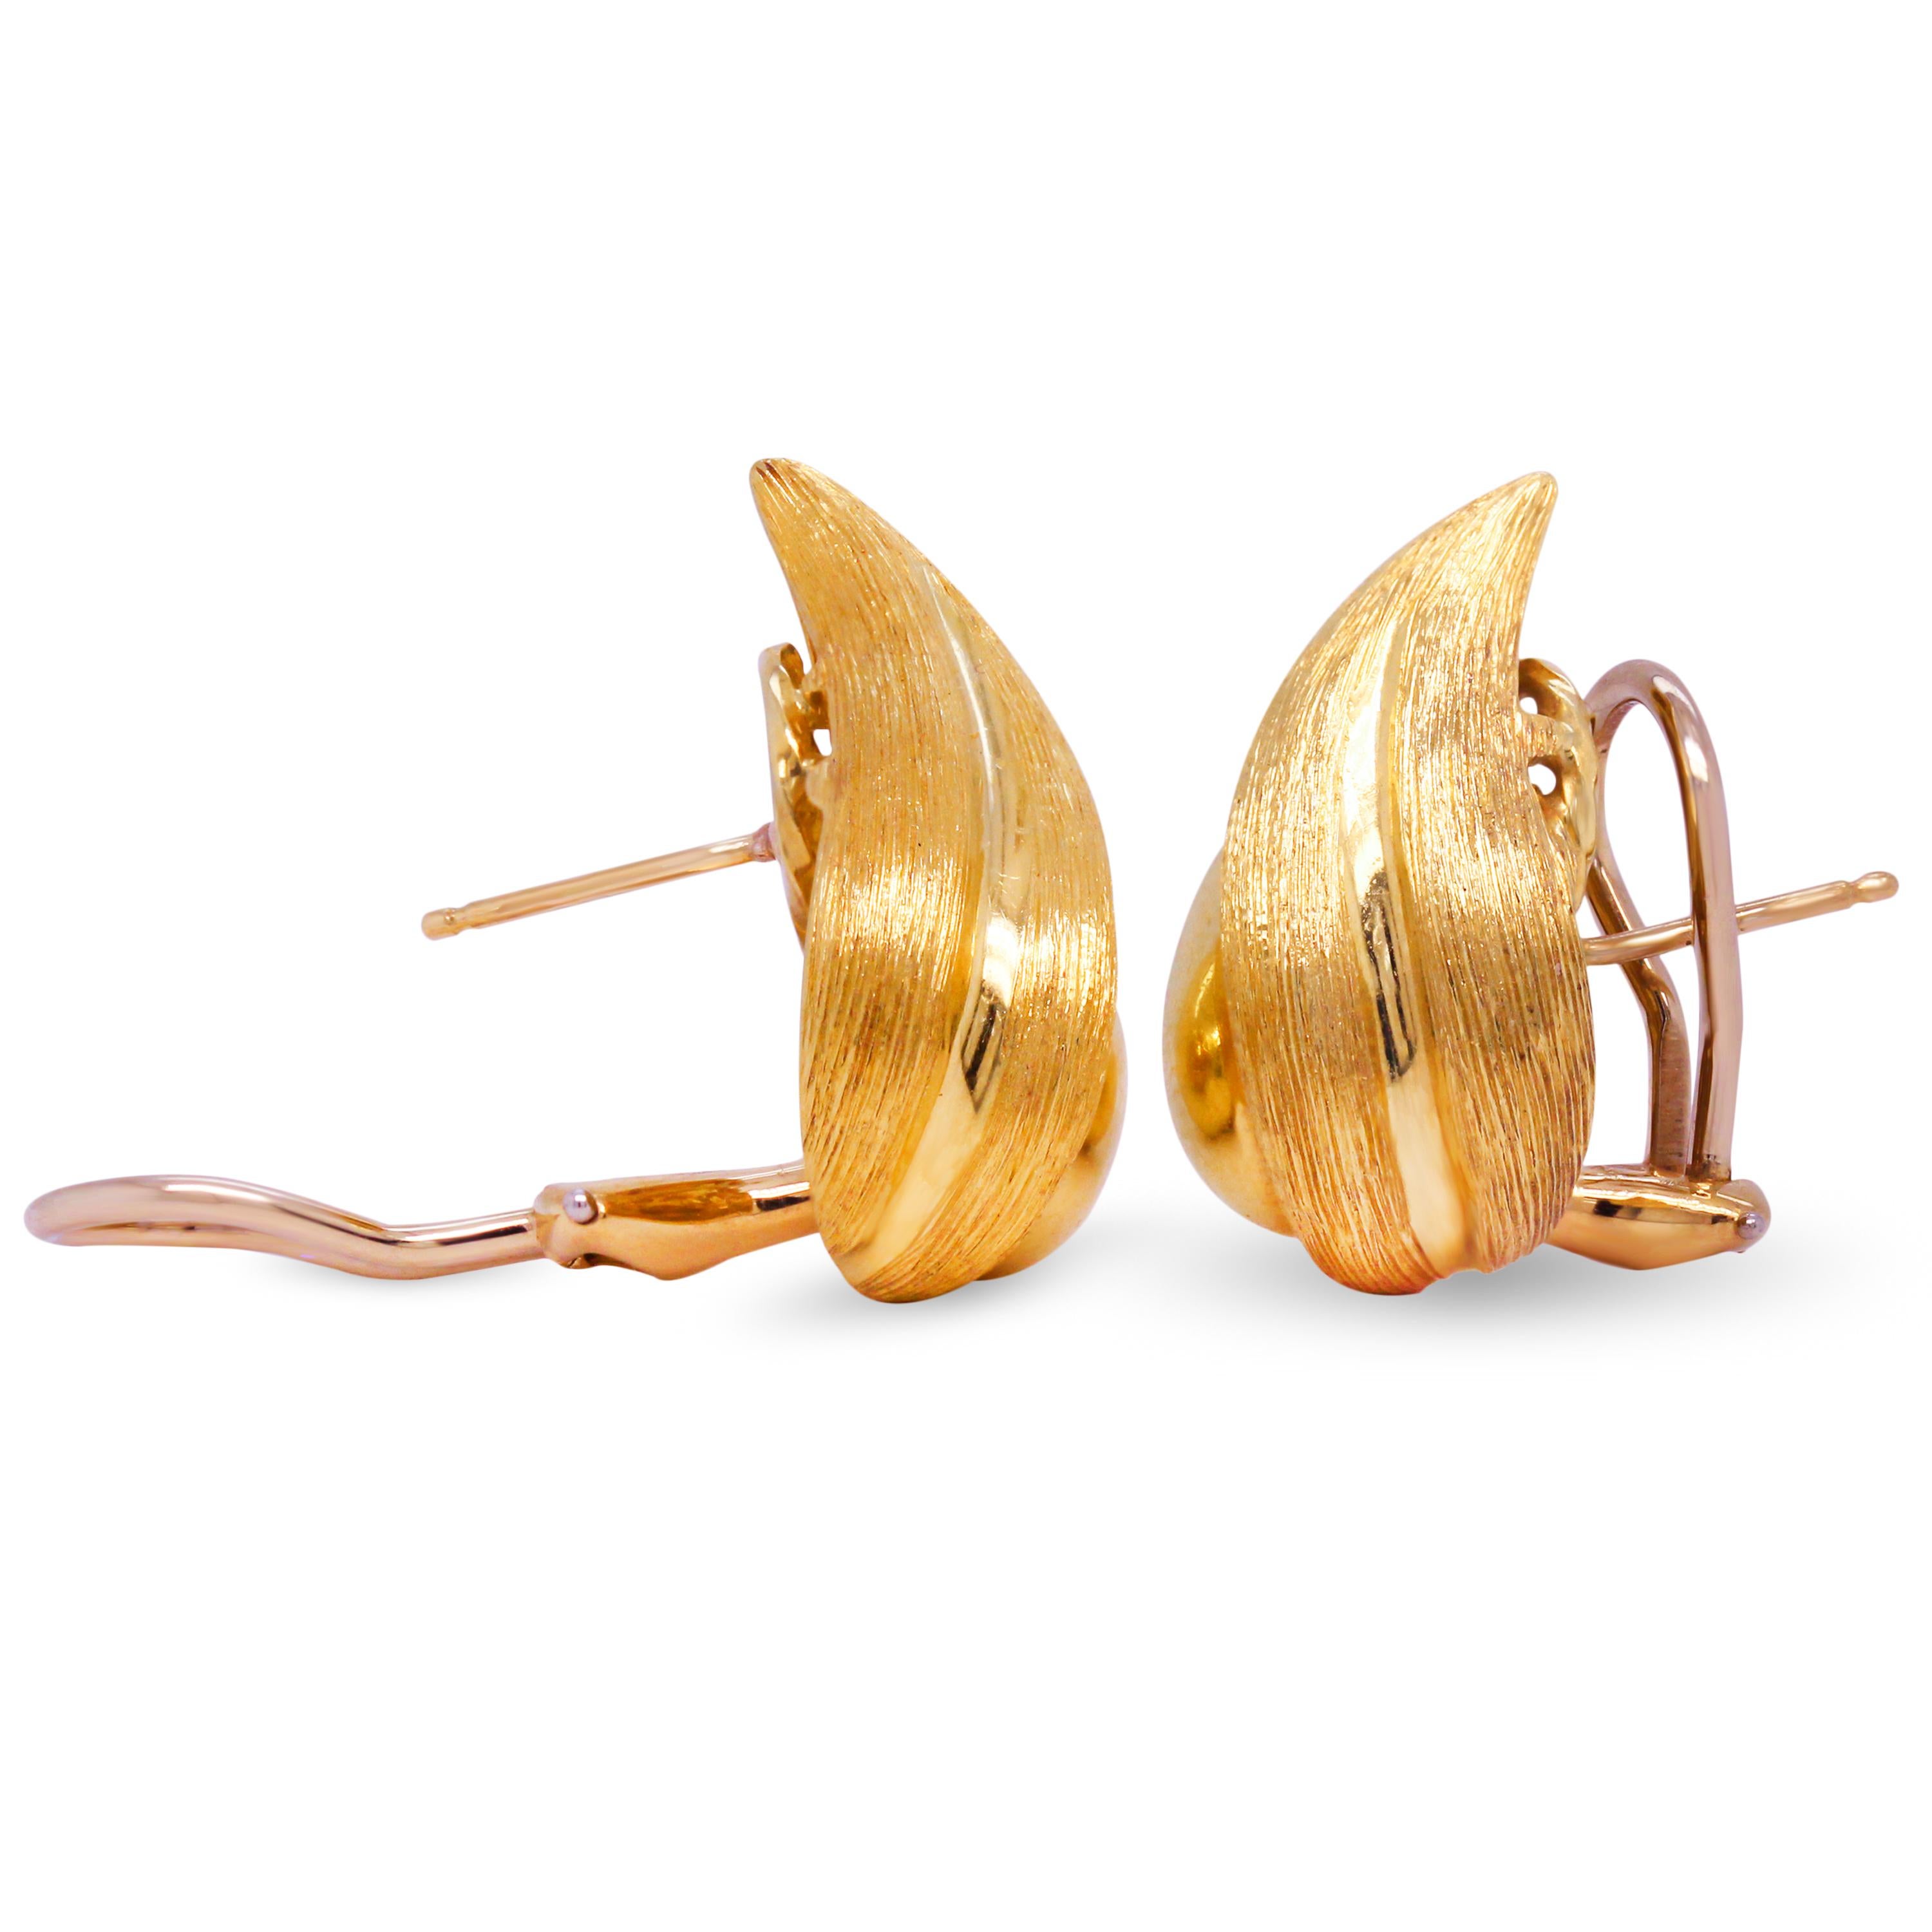 Henry Dunay 18 Karat Yellow Gold Leaf Shape Floral Motif Earrings

Beautiful, brushed-matte finished earrings by the famous designer, Henry Dunay. 

Earrings measure 0.90 inch by 0.63 inch. 16.6g total.

Post-omega backs used.

Hallmarked Henry